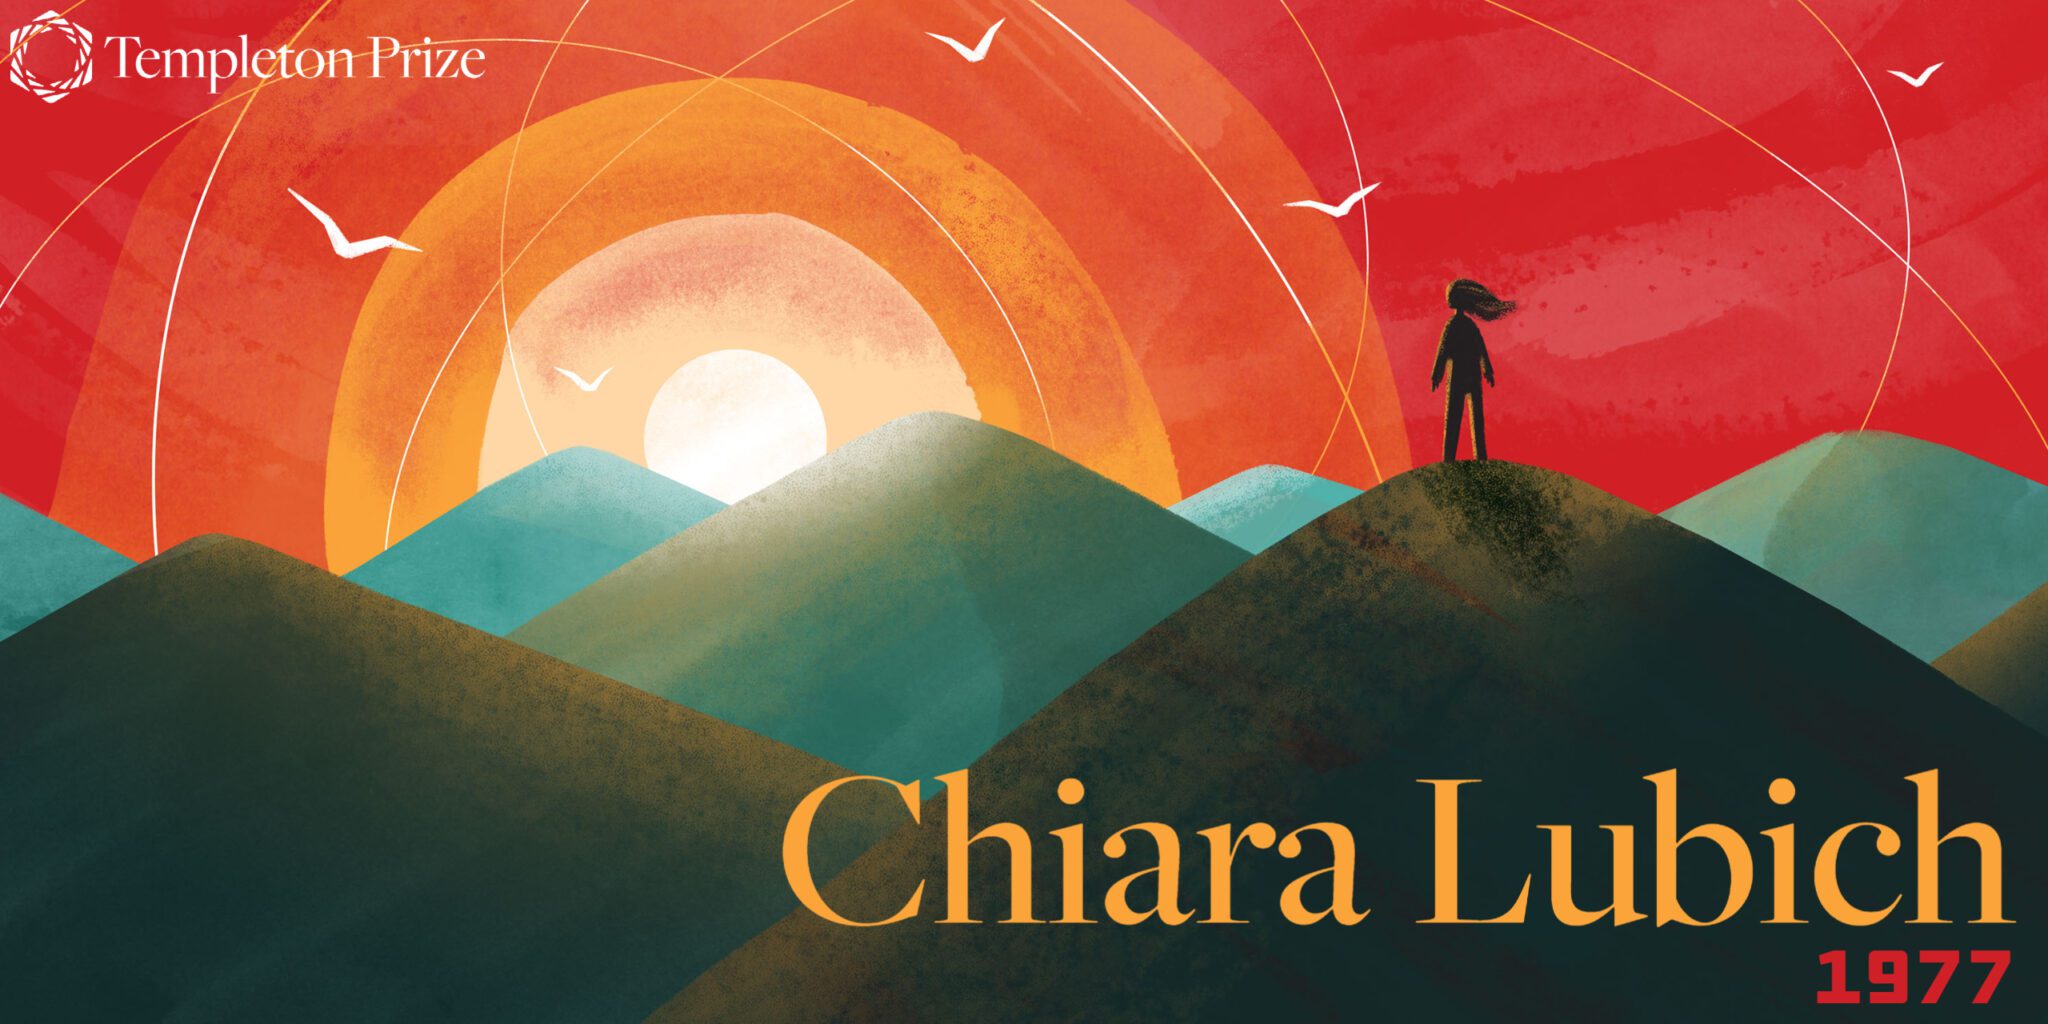 Chiara Lubich’s Movement of Peace, Unity and Love